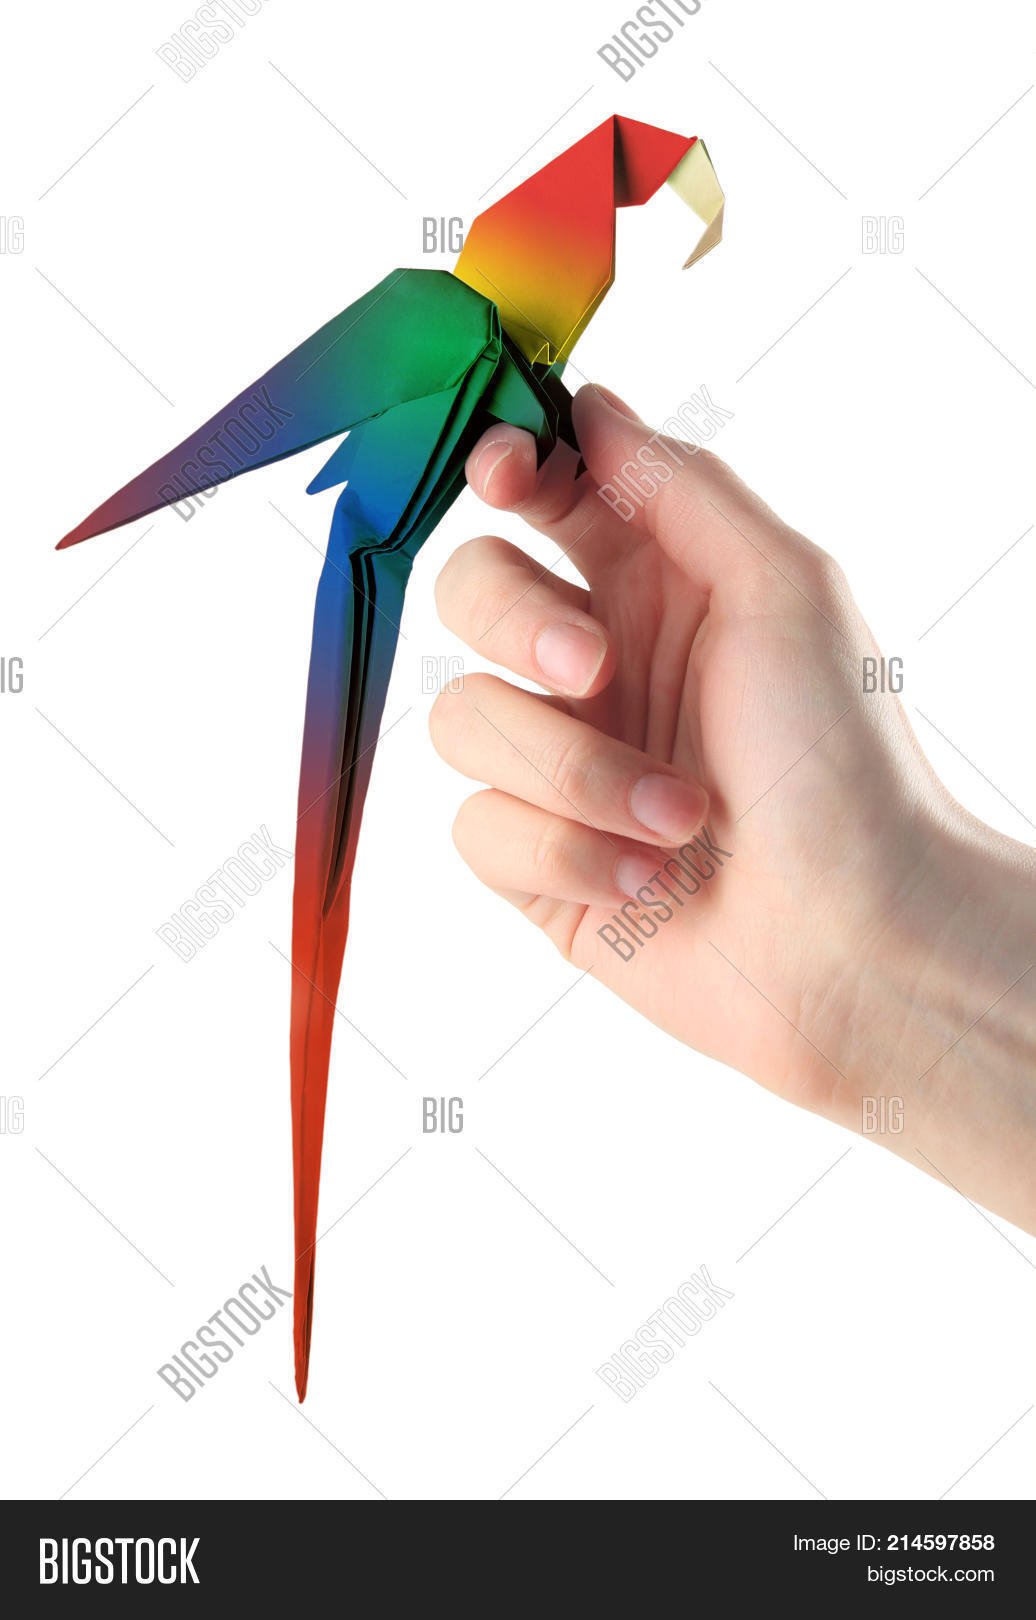 Origami Macaw Parrot Step By Step Origami Macaw Parrot Image Photo Free Trial Bigstock